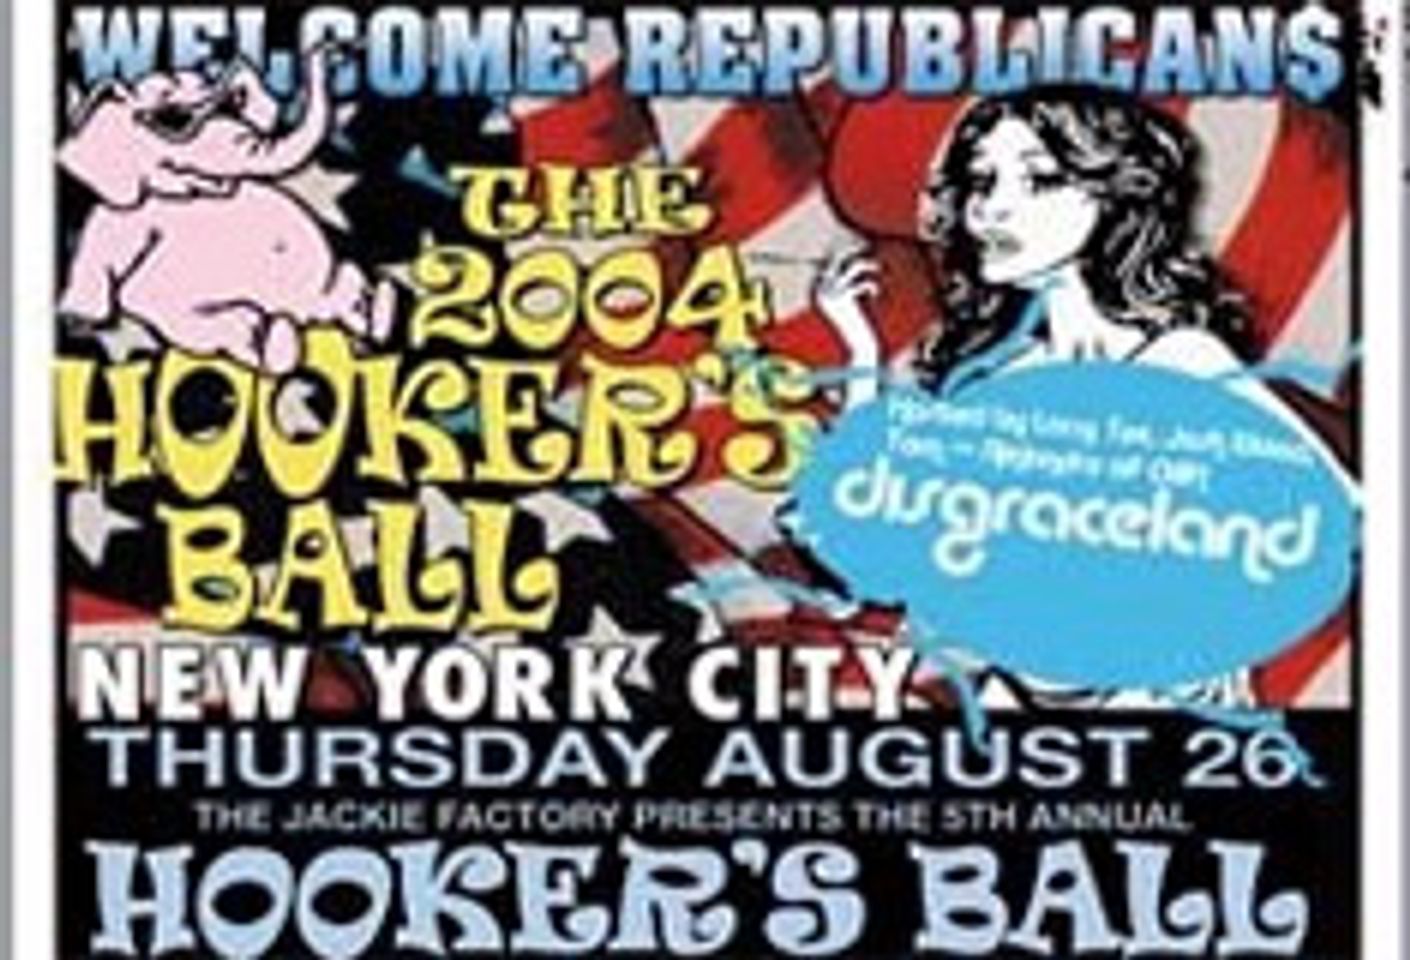 Hooker&#8217;s Ball #5 Set For Tonight In NYC